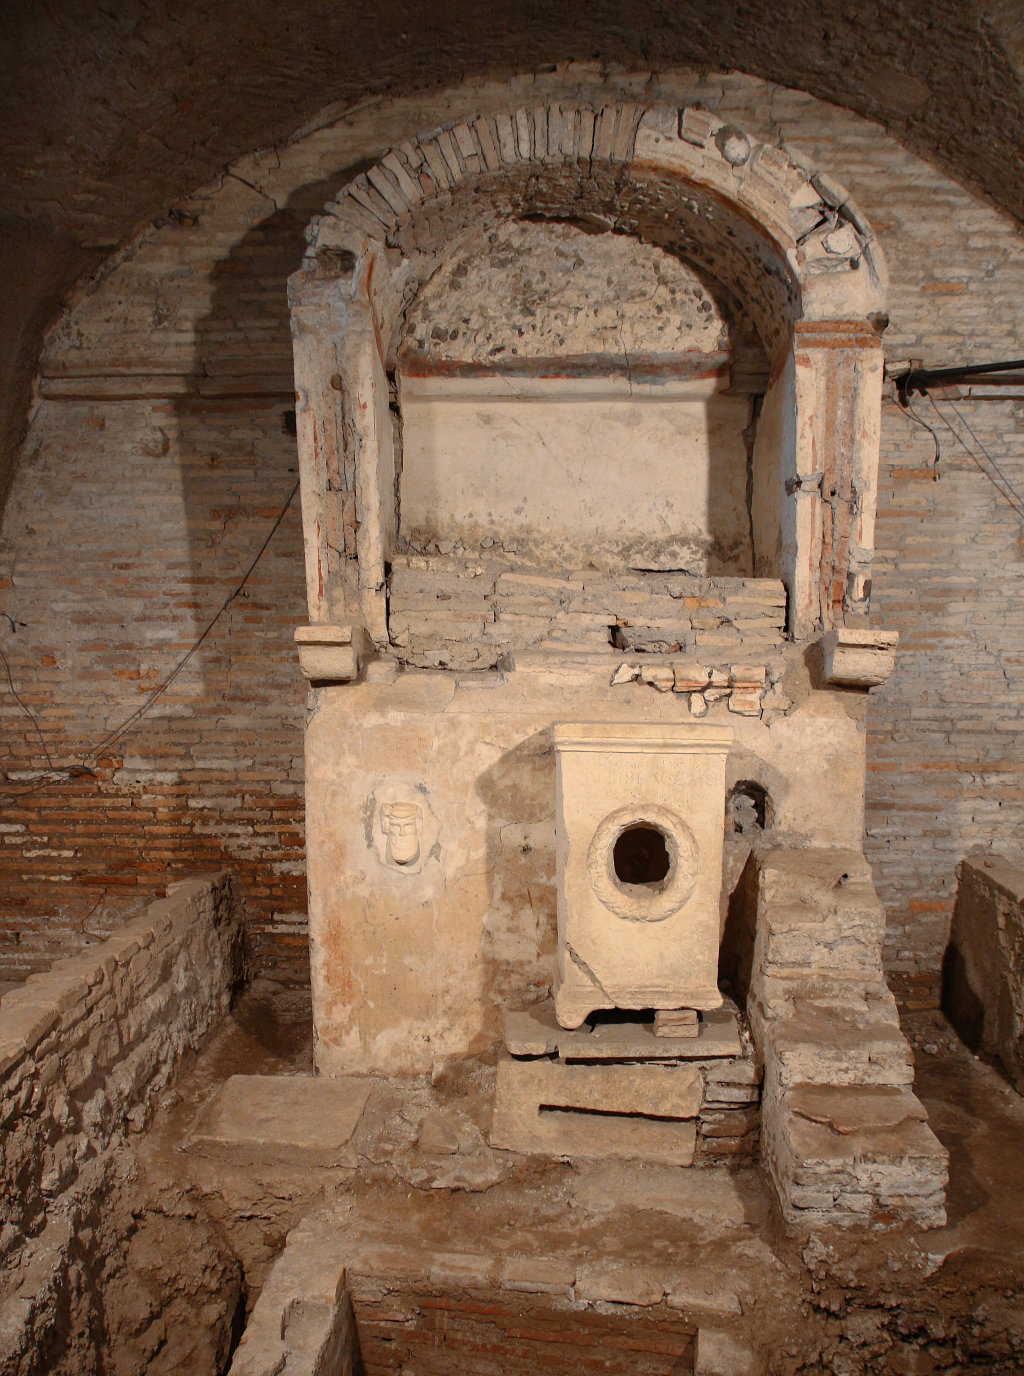 The altar and aedicula in the northern room, seen from the south.